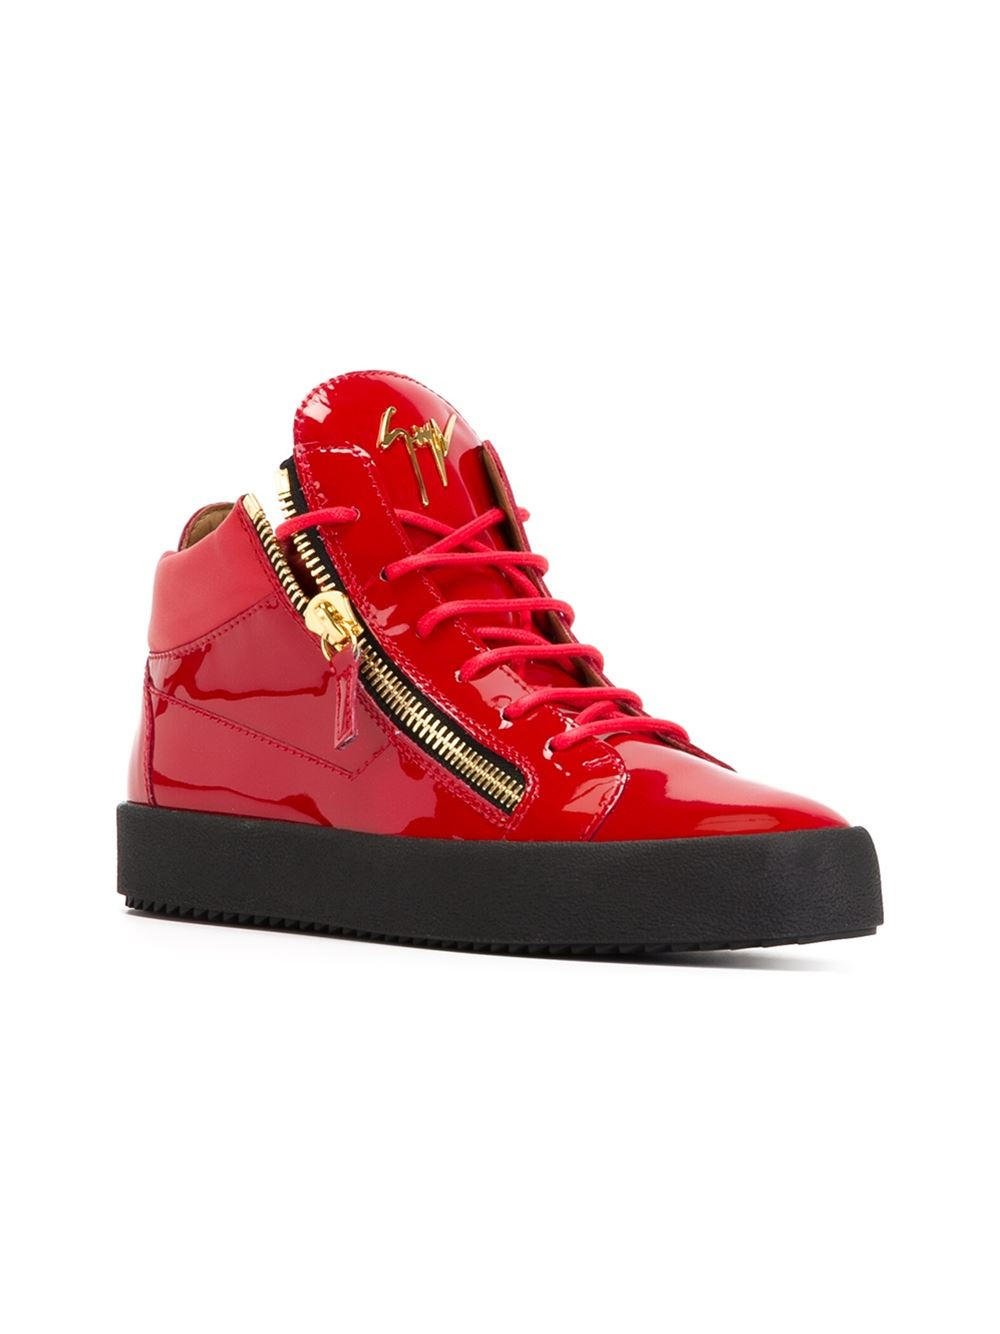 Giuseppe Zanotti Leather Hi-top Sneakers in Red for - Lyst